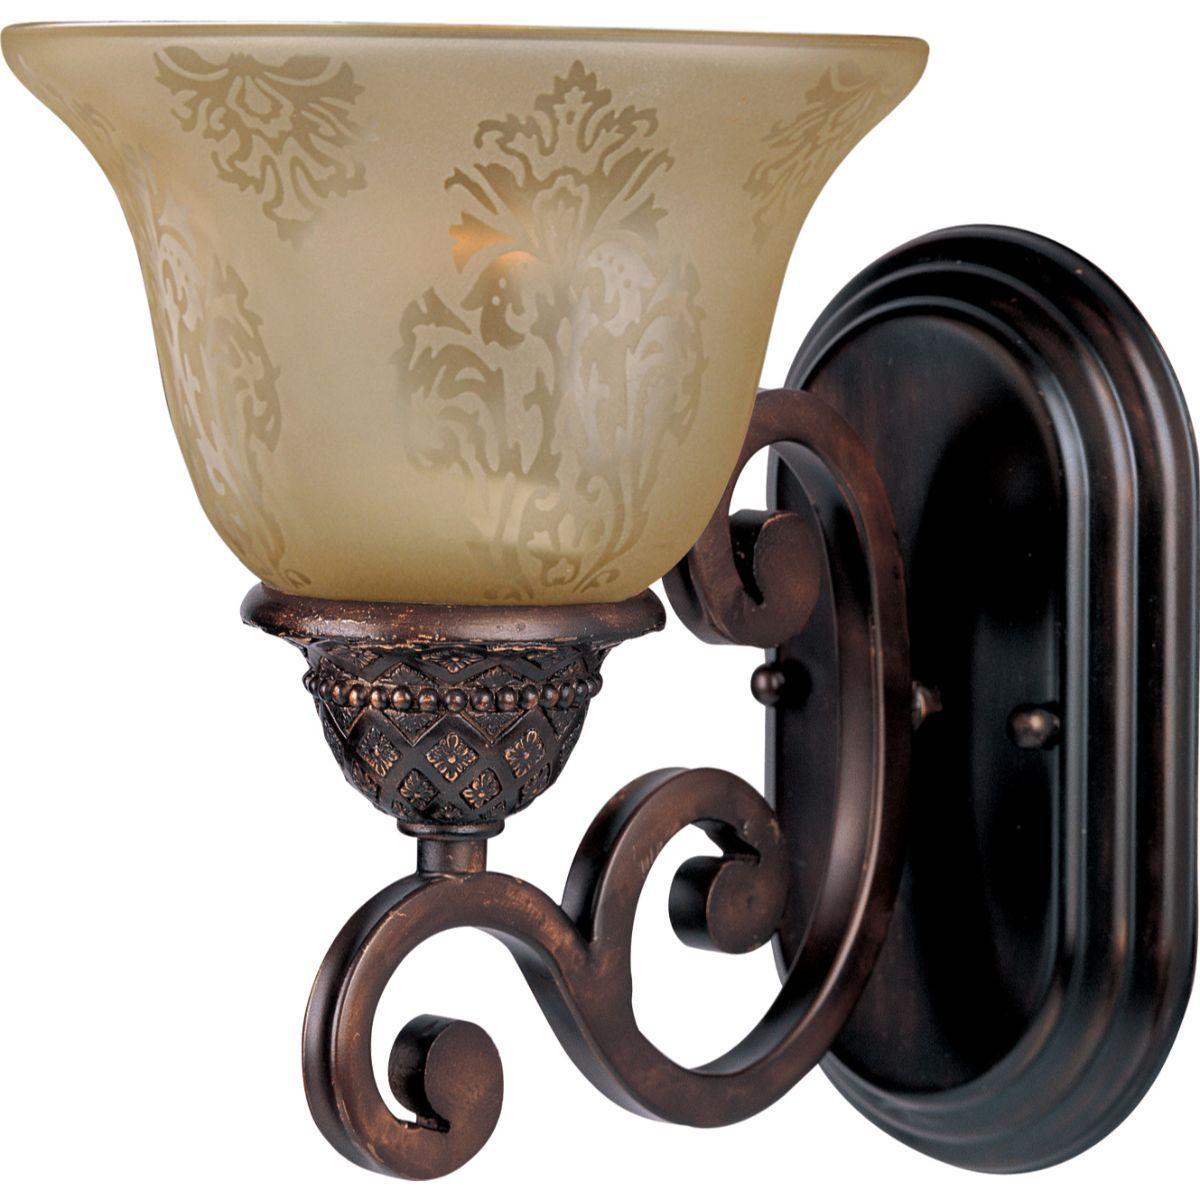 Symphony 10 in. Armed Sconce Oil-Rubbed Bronze finish